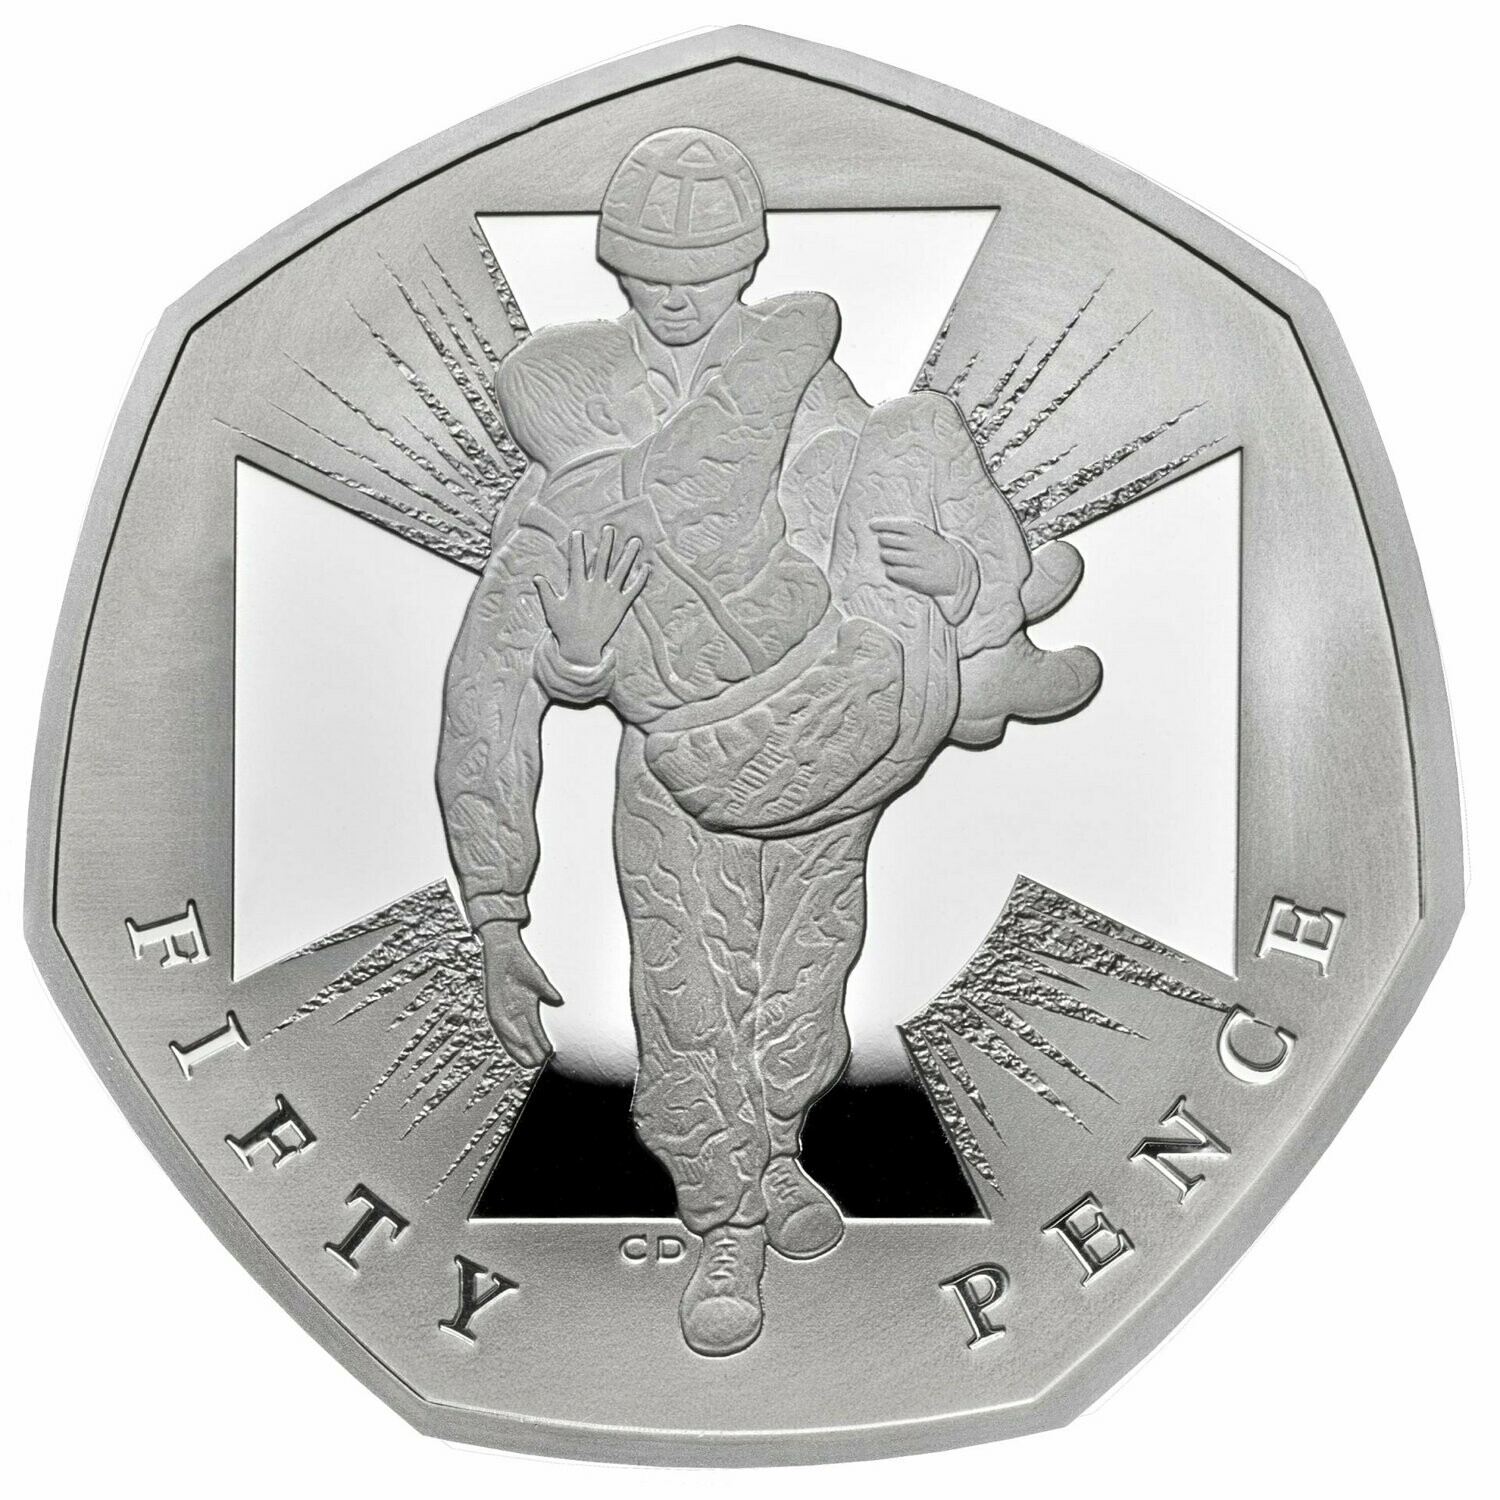 2019 Victoria Cross Heroic Acts 50p Silver Proof Coin - 2006